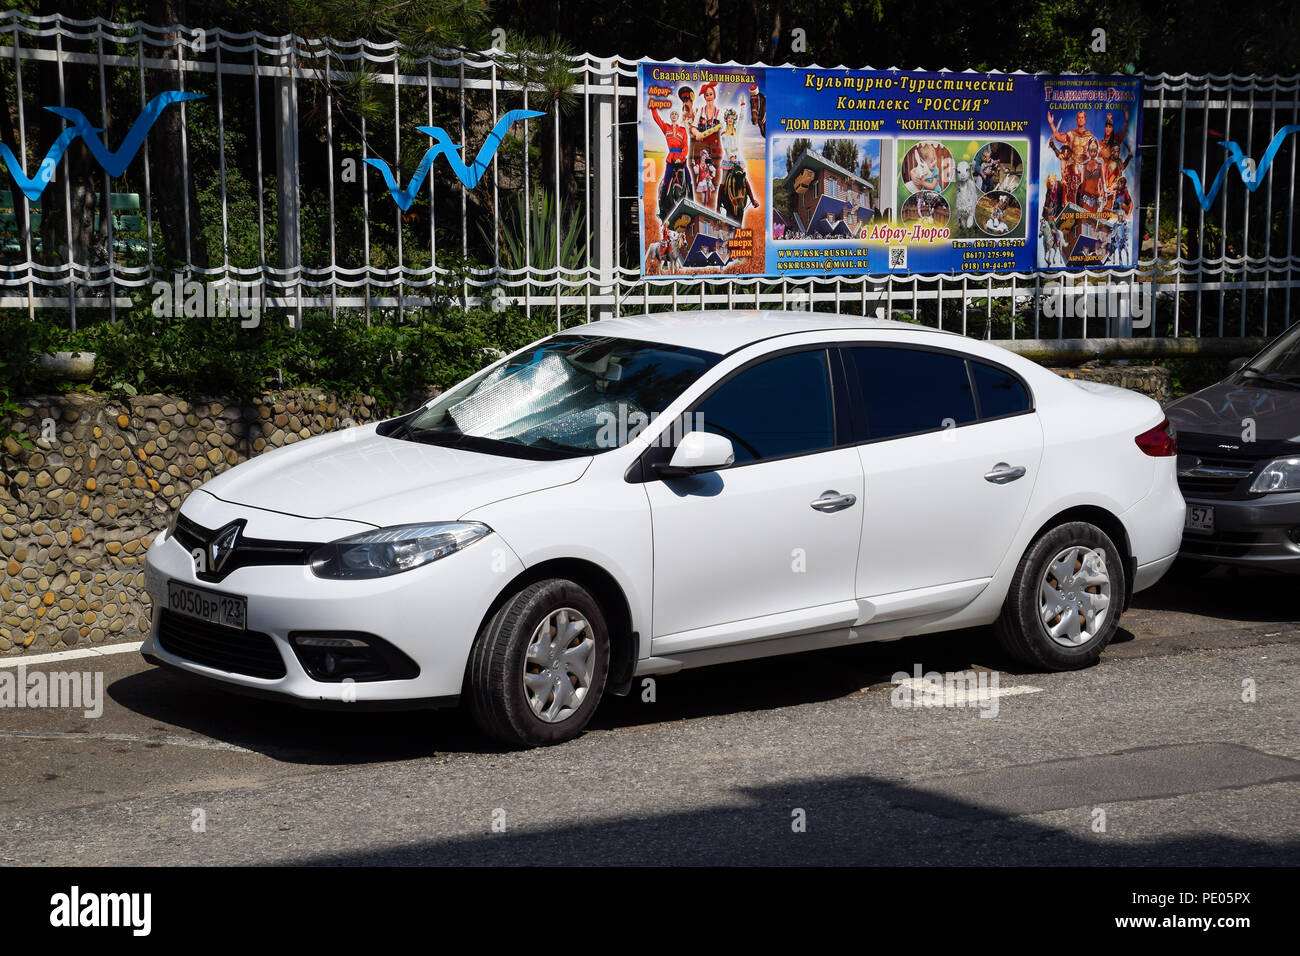 Novorossiysk, Russia - August 06, 2018: Parked car on the roadside of the city road Renault Fluence Stock Photo